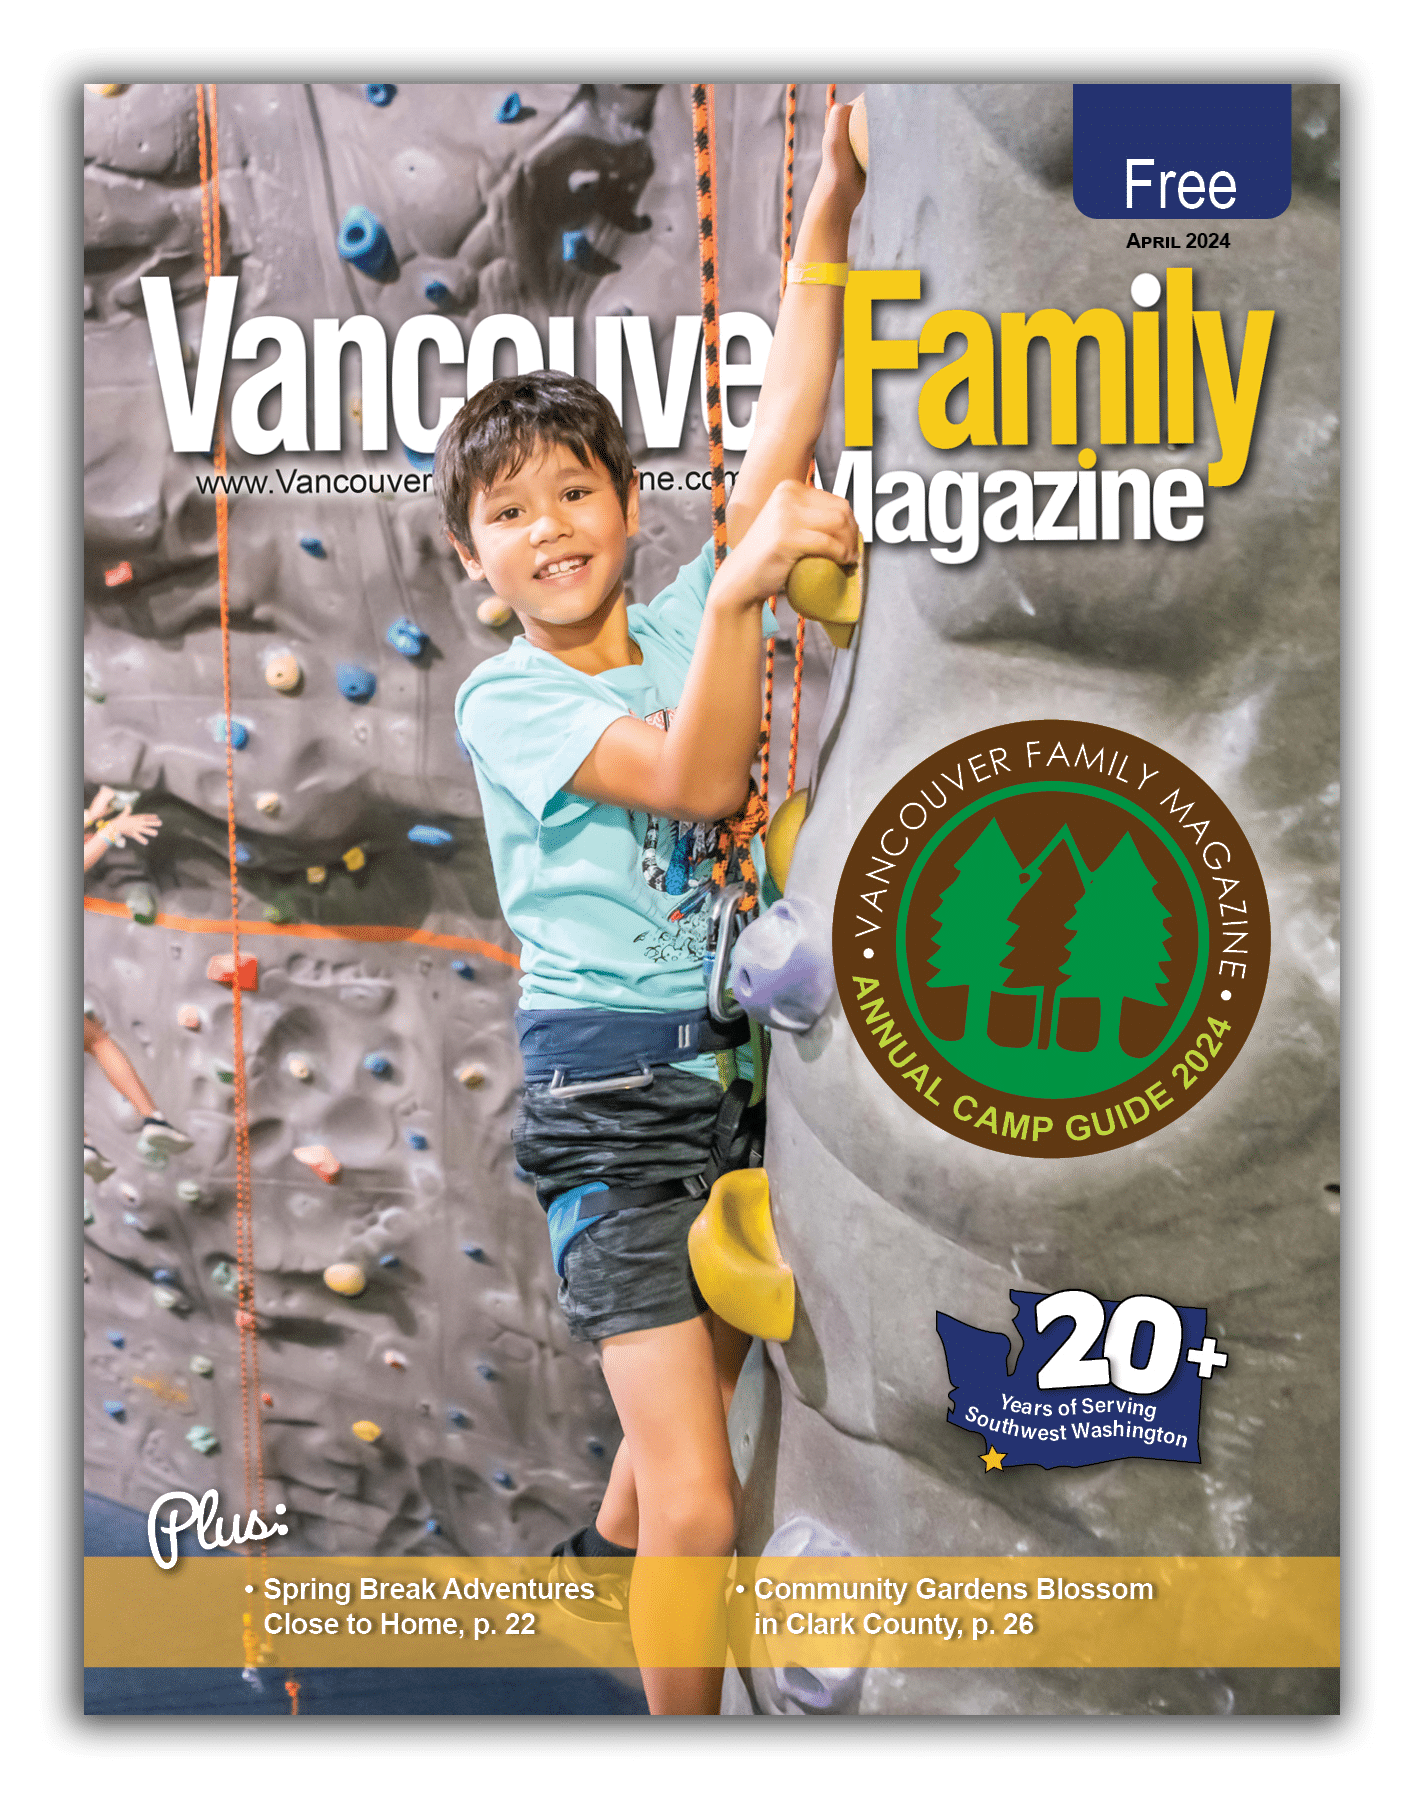 Vancouver Family Magazine April 2024 issue features a boy climbing on an artificial rock wall